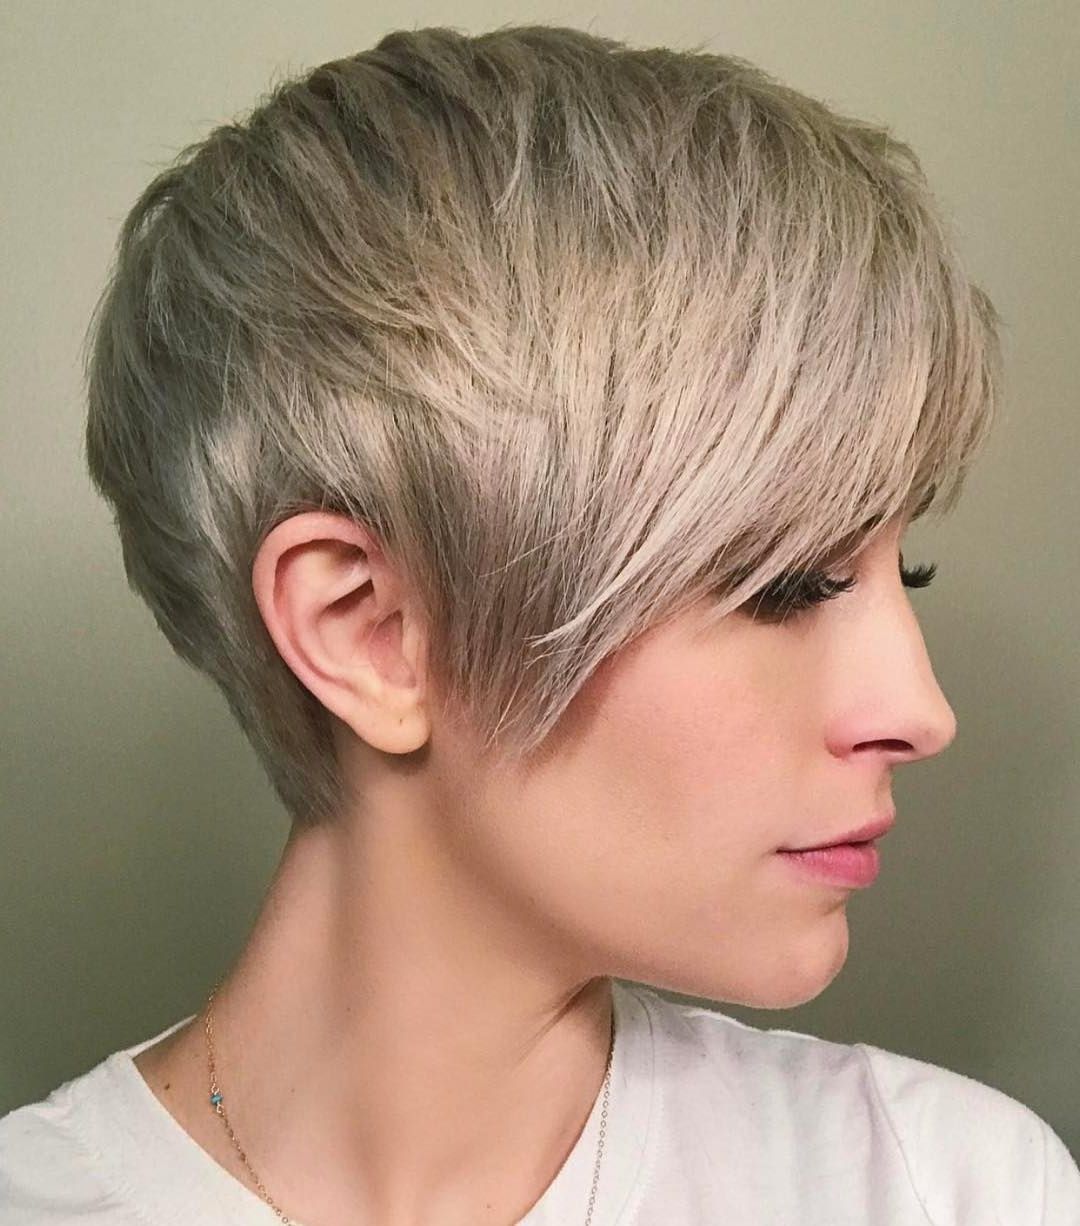 10 Best Short Straight Hairstyle Trends – Women Short Haircut Ideas 2018 Within 2018 Disconnected Blonde Balayage Pixie Haircuts (Photo 2 of 15)